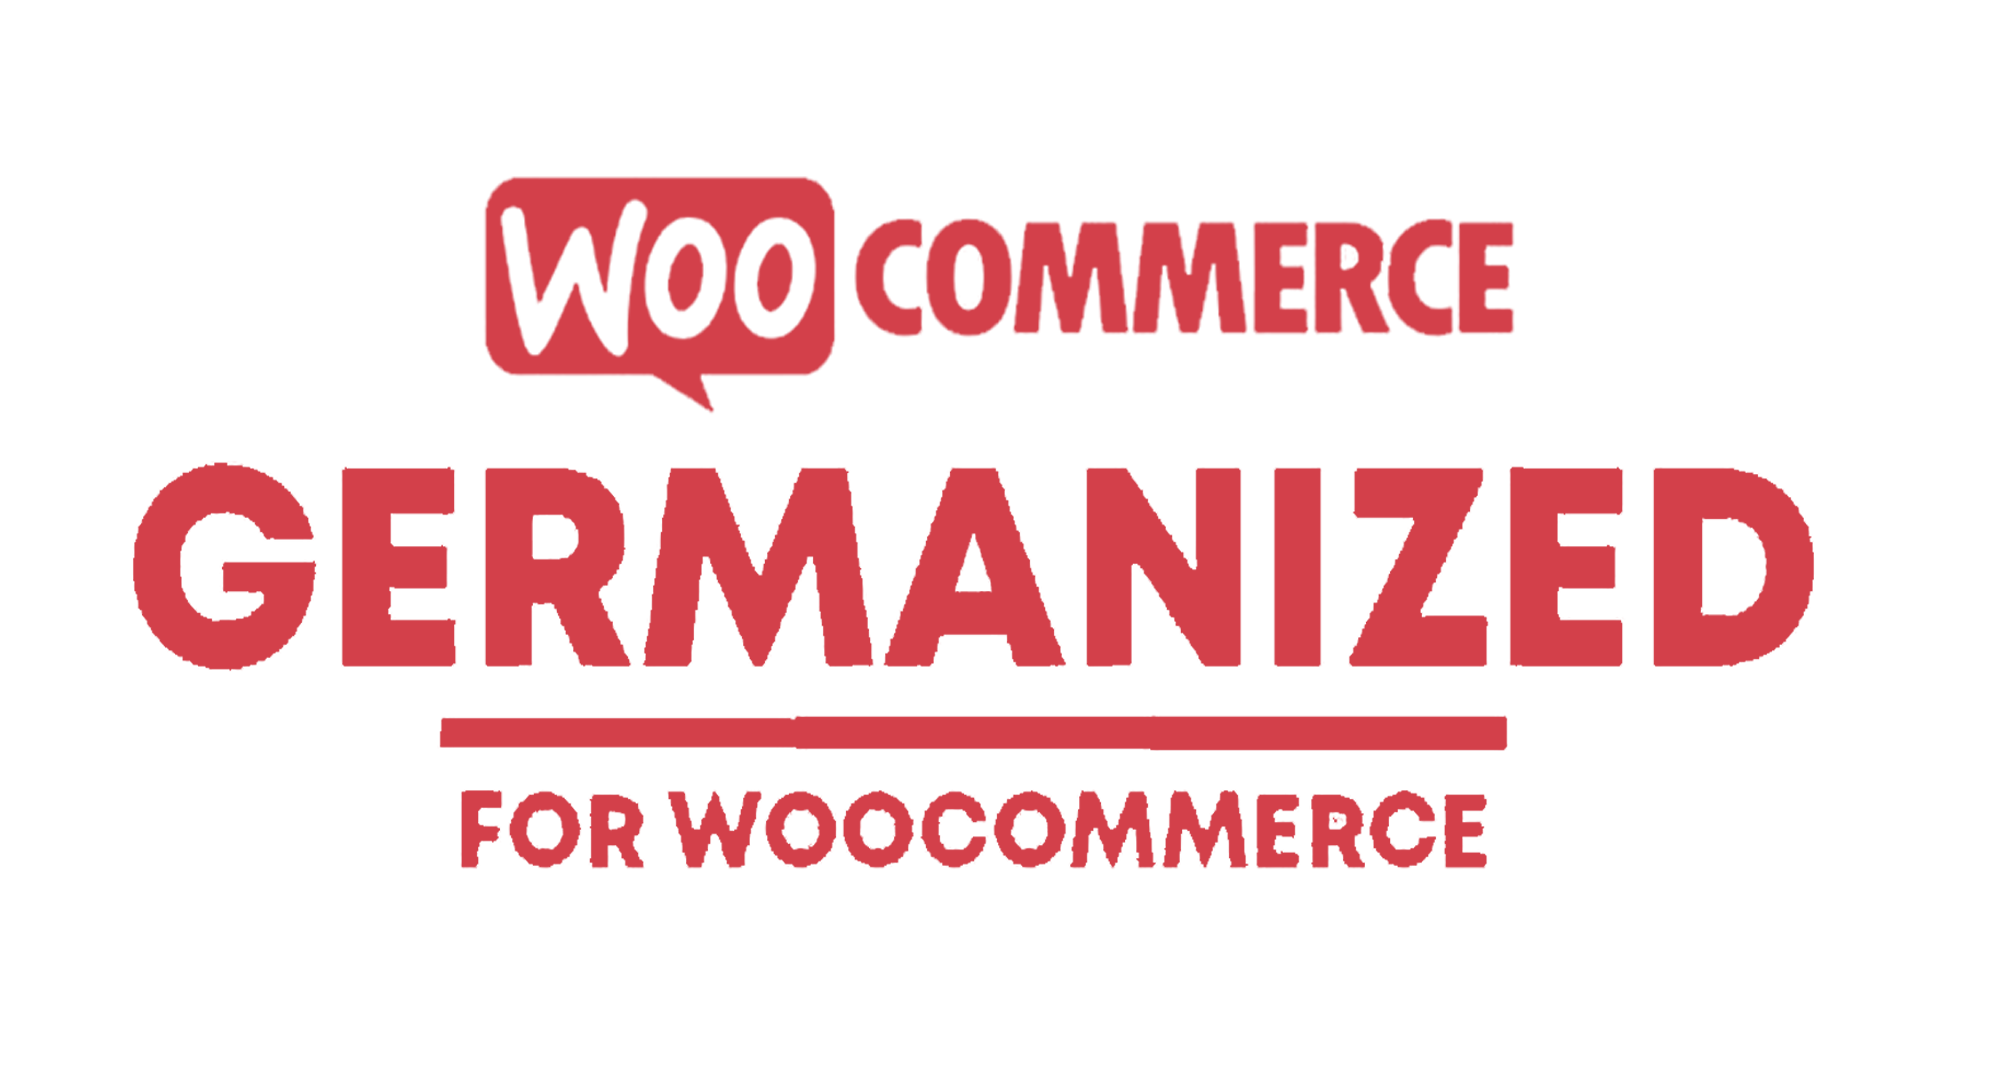 germanized 1 woo commerce rot